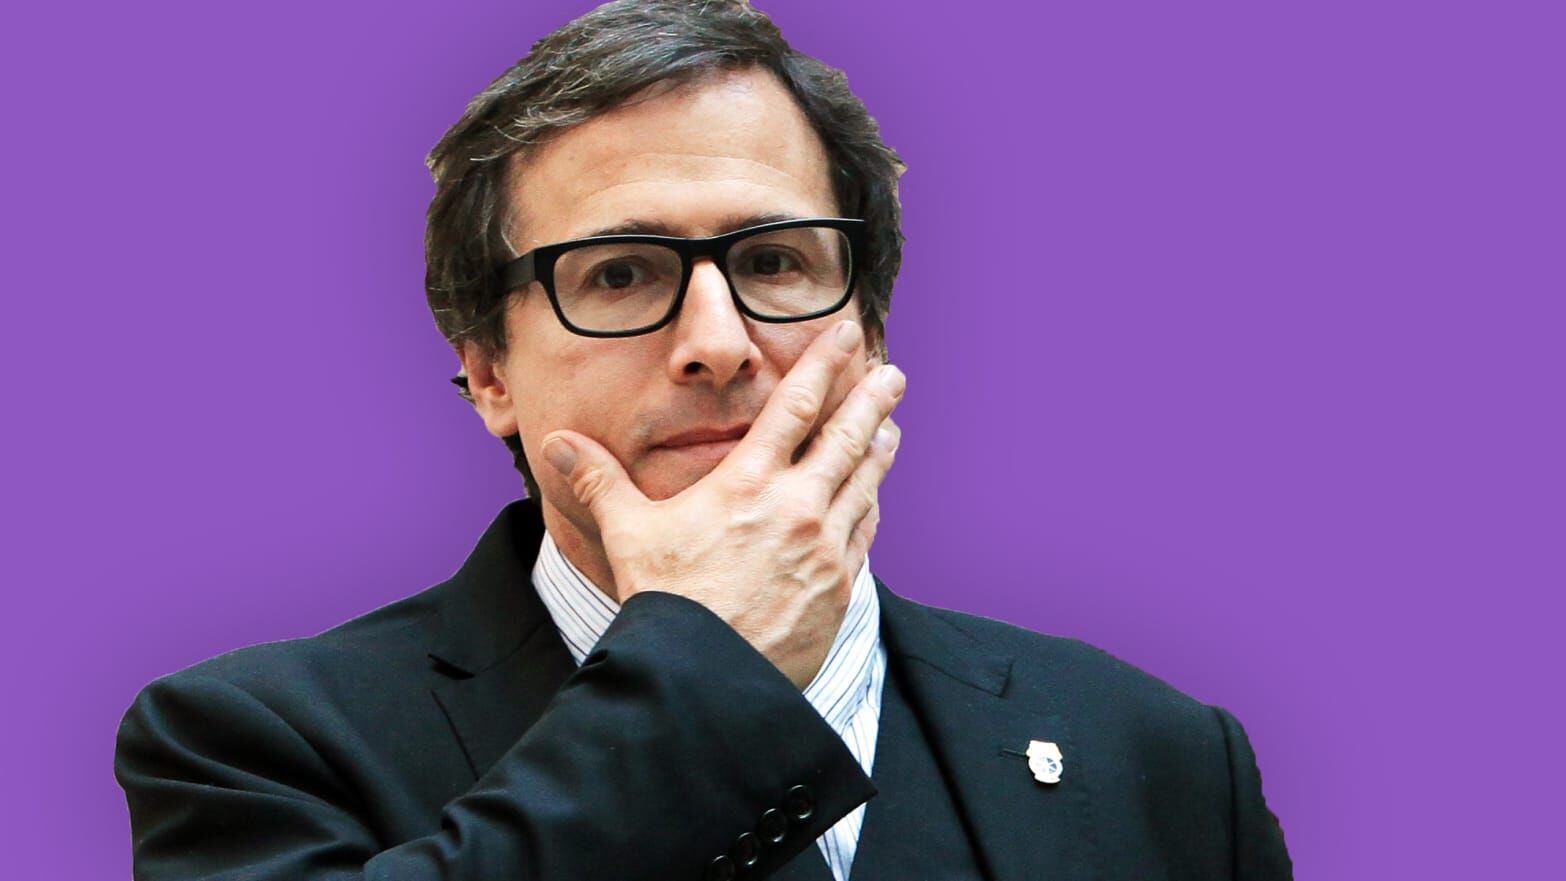 Must see: all eyes on the director | David O. Russell